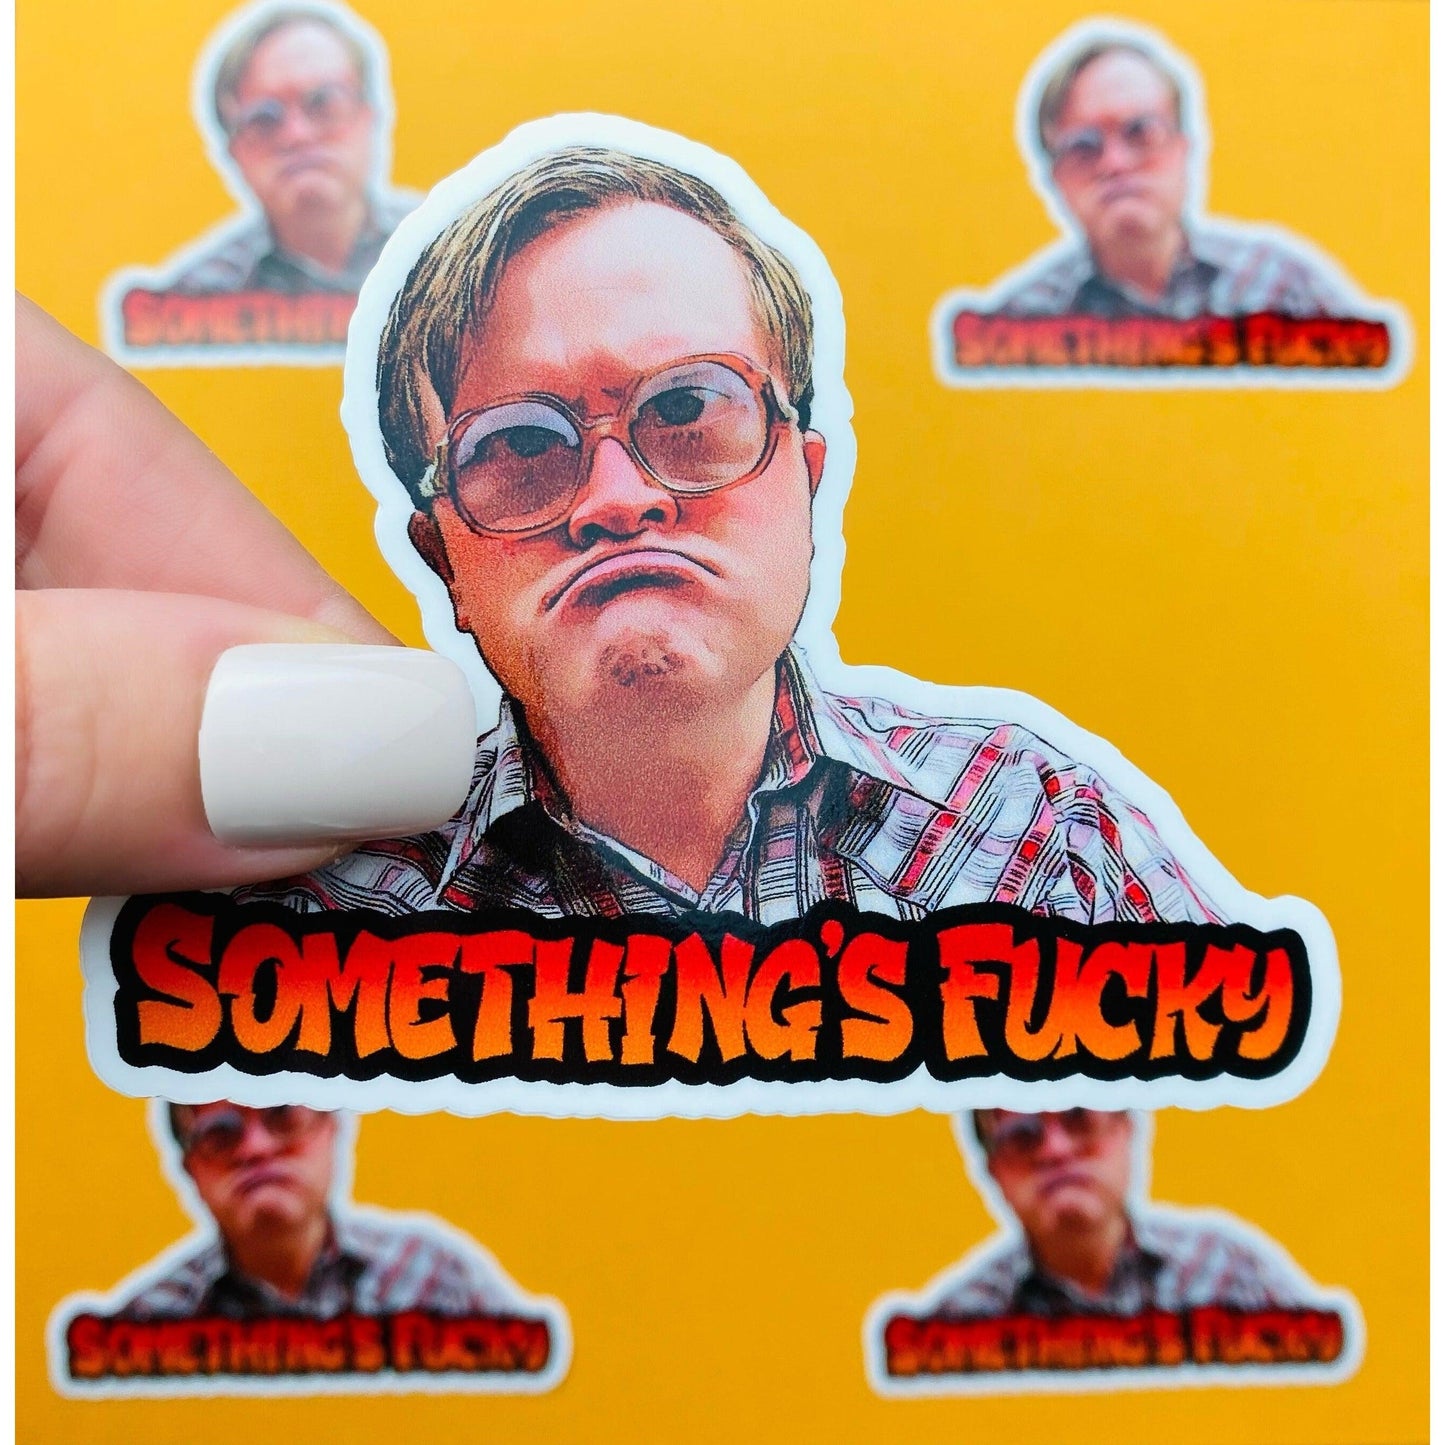 Trailer Park Boys Something's Fucky Sticker | Officially Licensed Bubbles Sticker | Trailer Park Boys Bubbles Quotes with Glasses - Ottos Grotto :: Stickers For Your Stuff